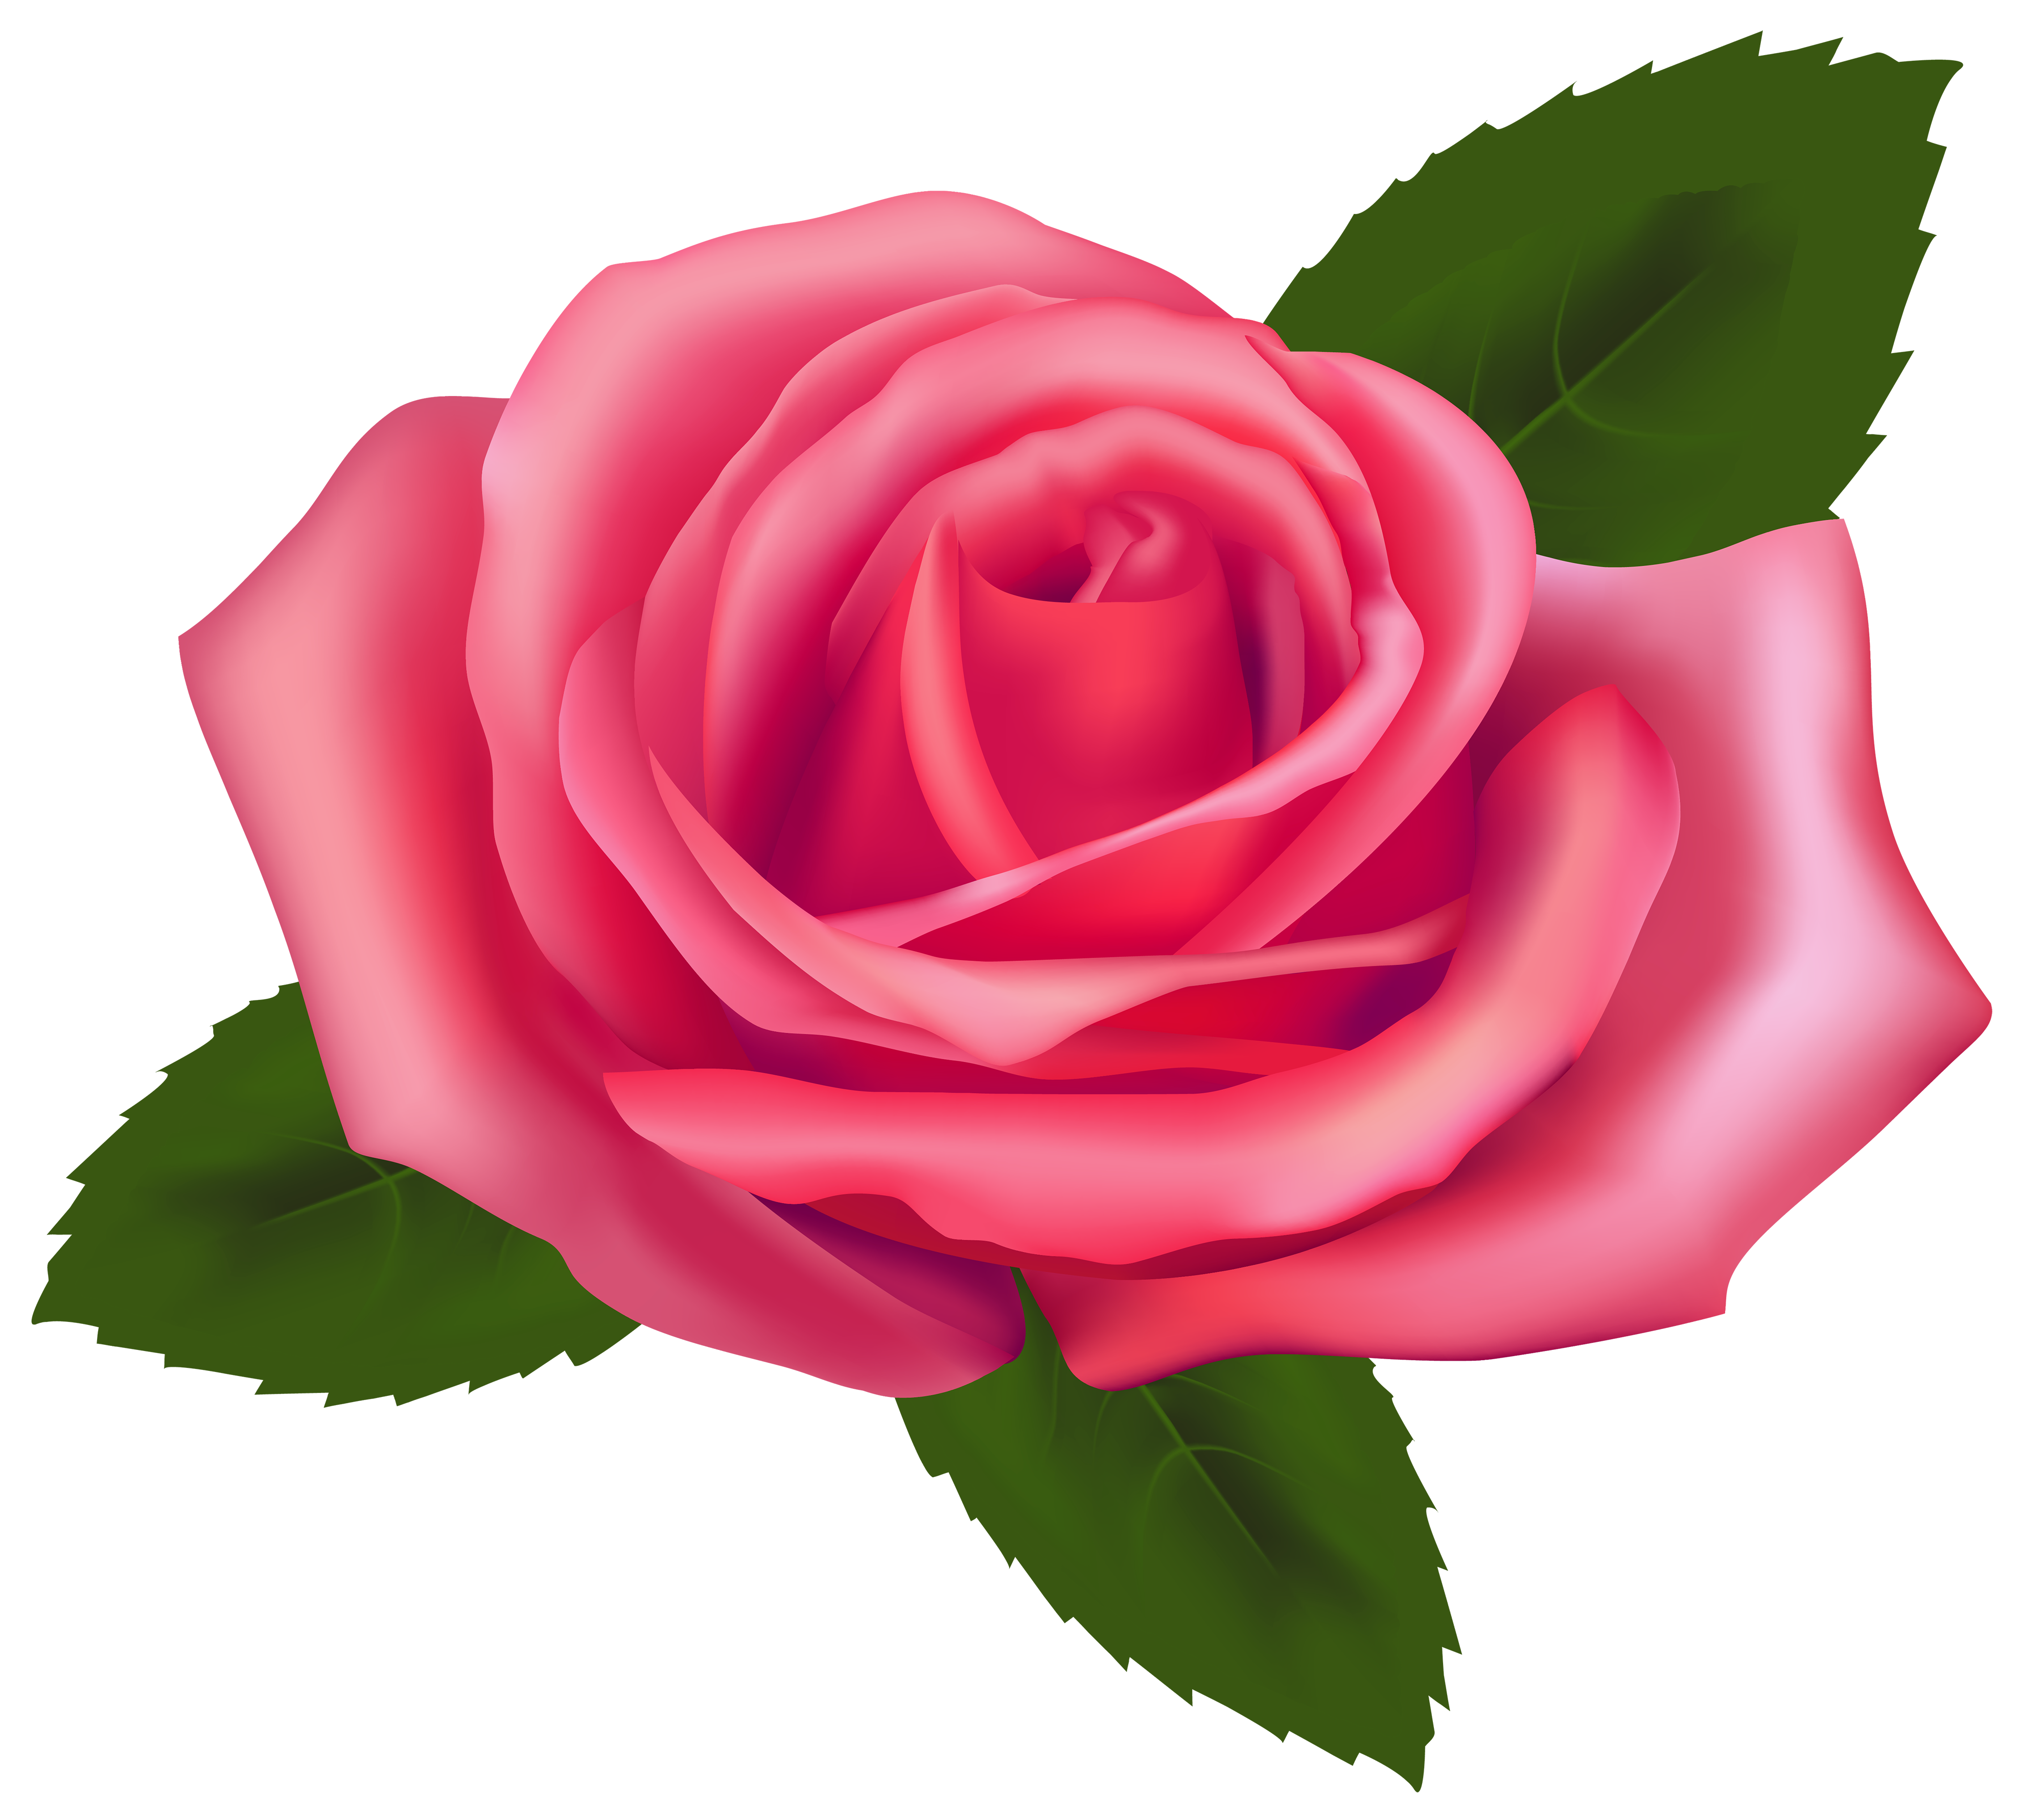 Beautiful Pink Rose PNG Clipart